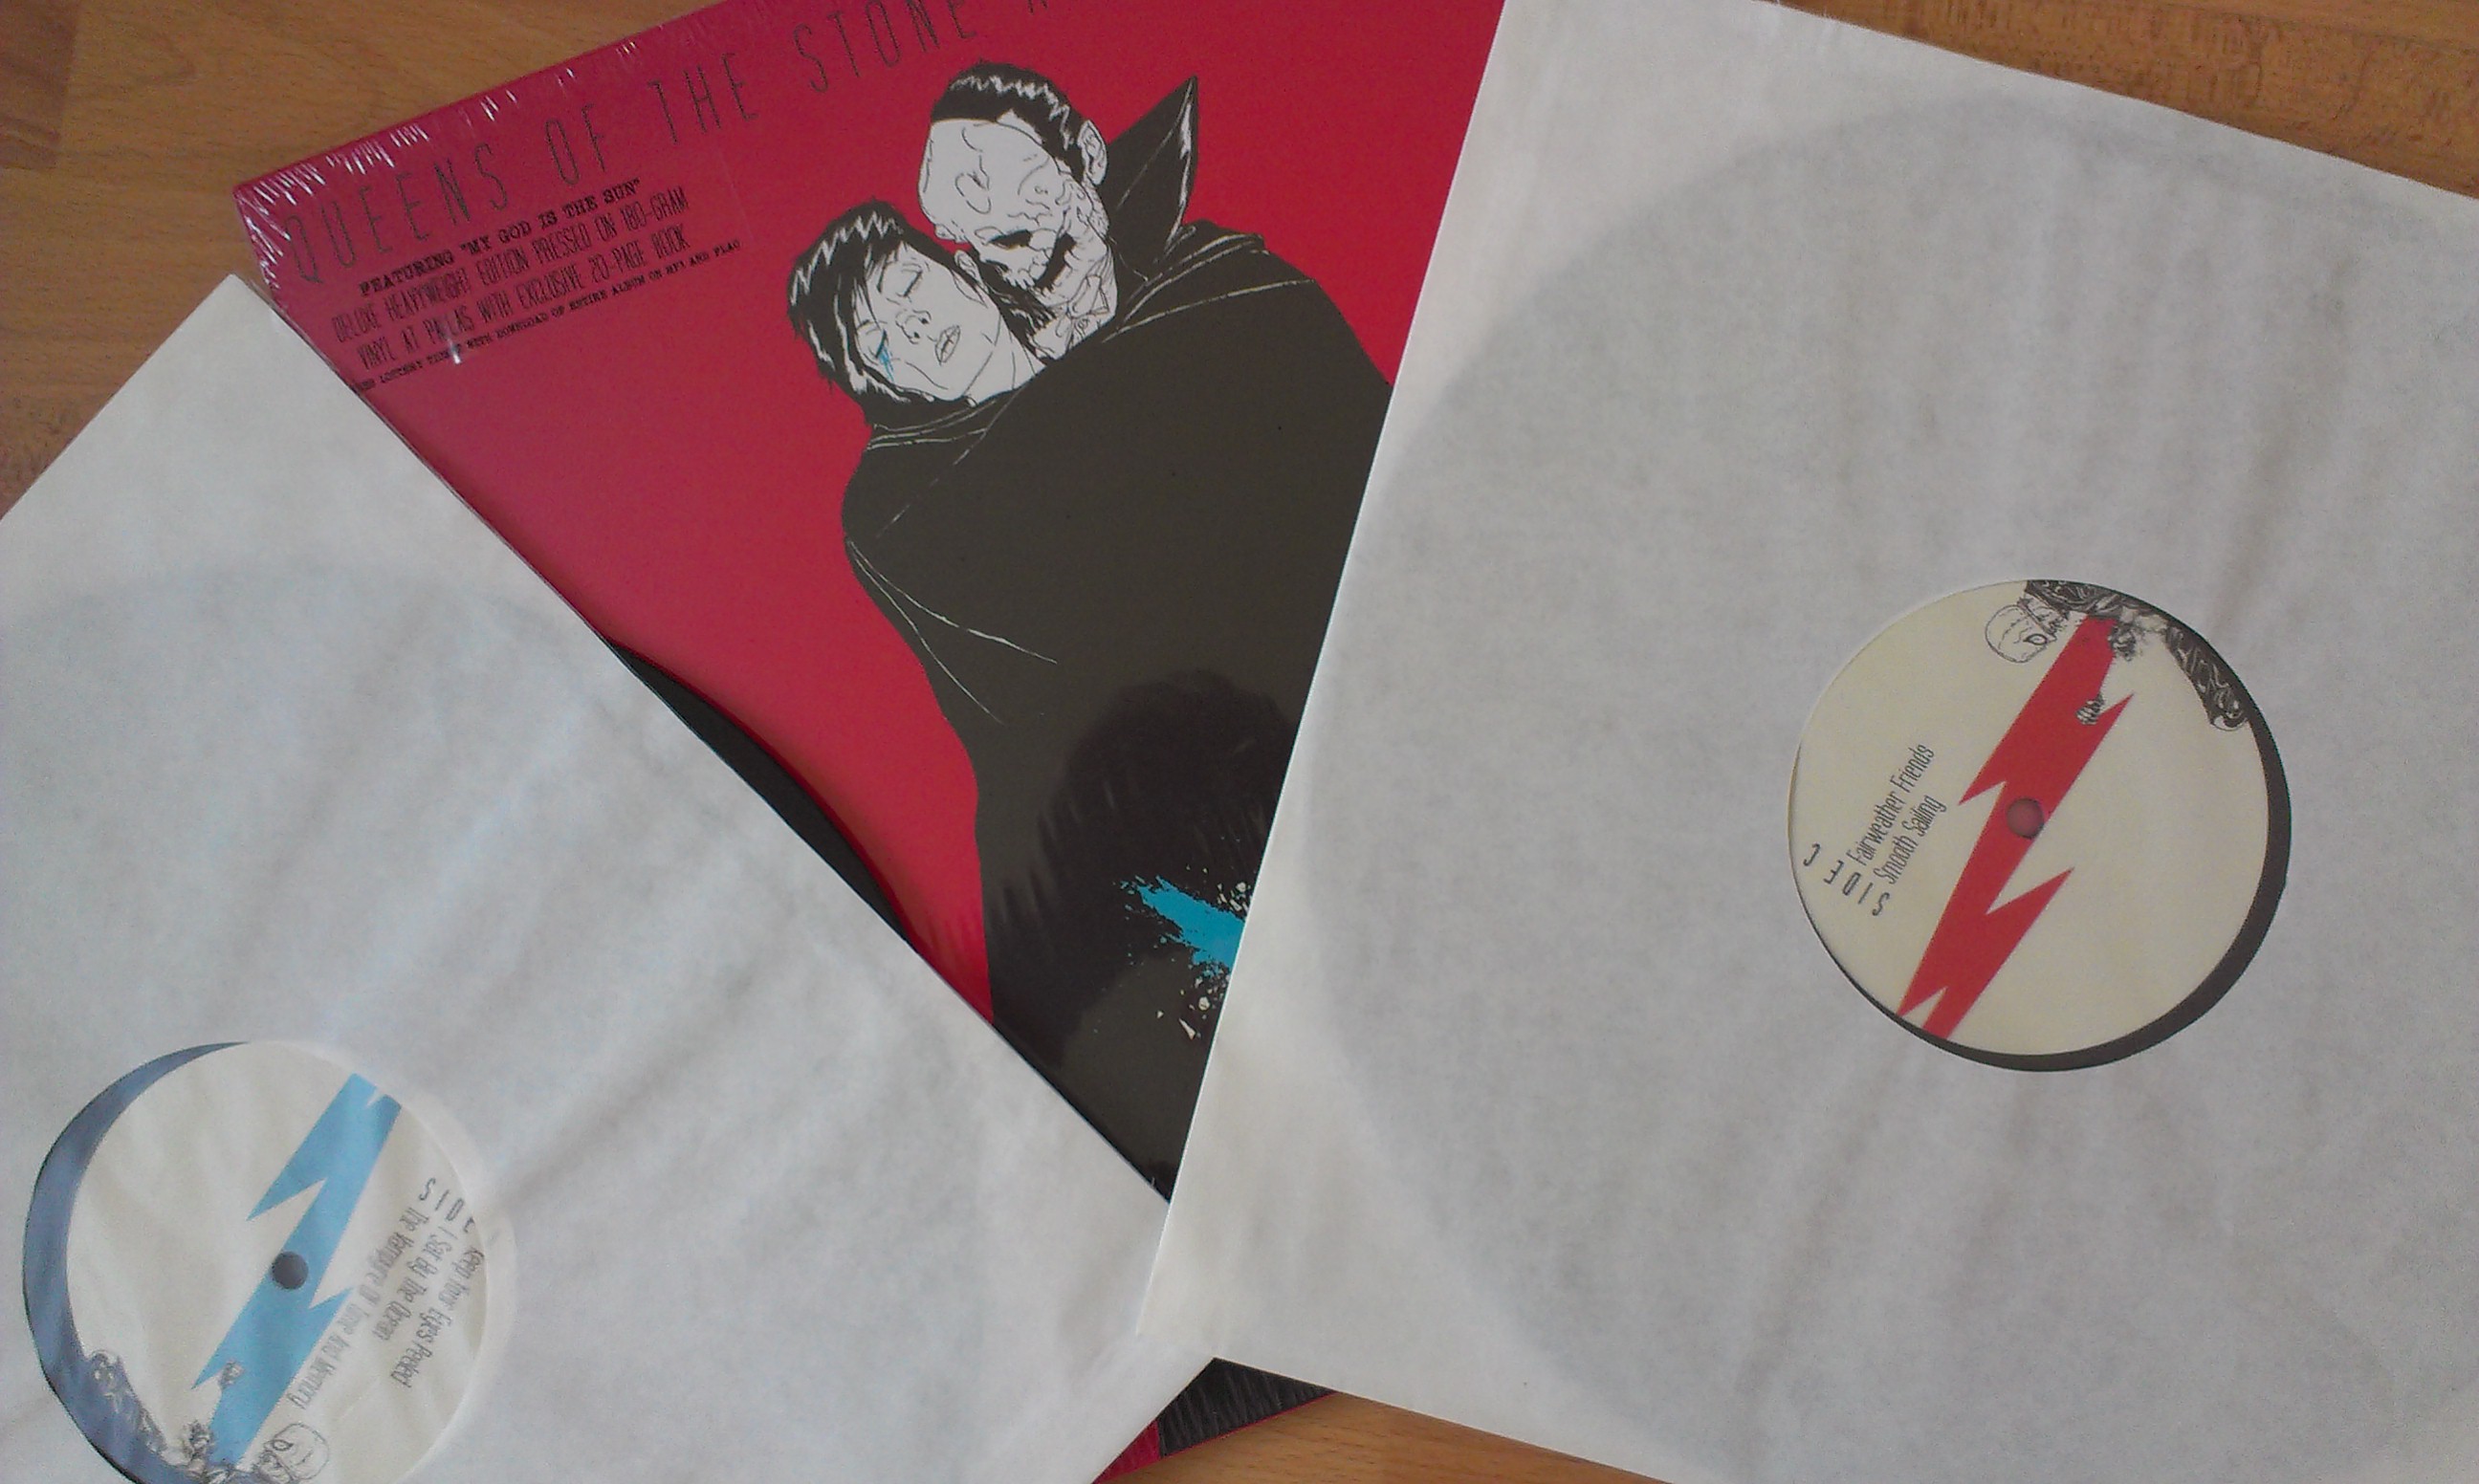 Queens of the Stone Age – …Like Clockwork 2Lp deluxe edition